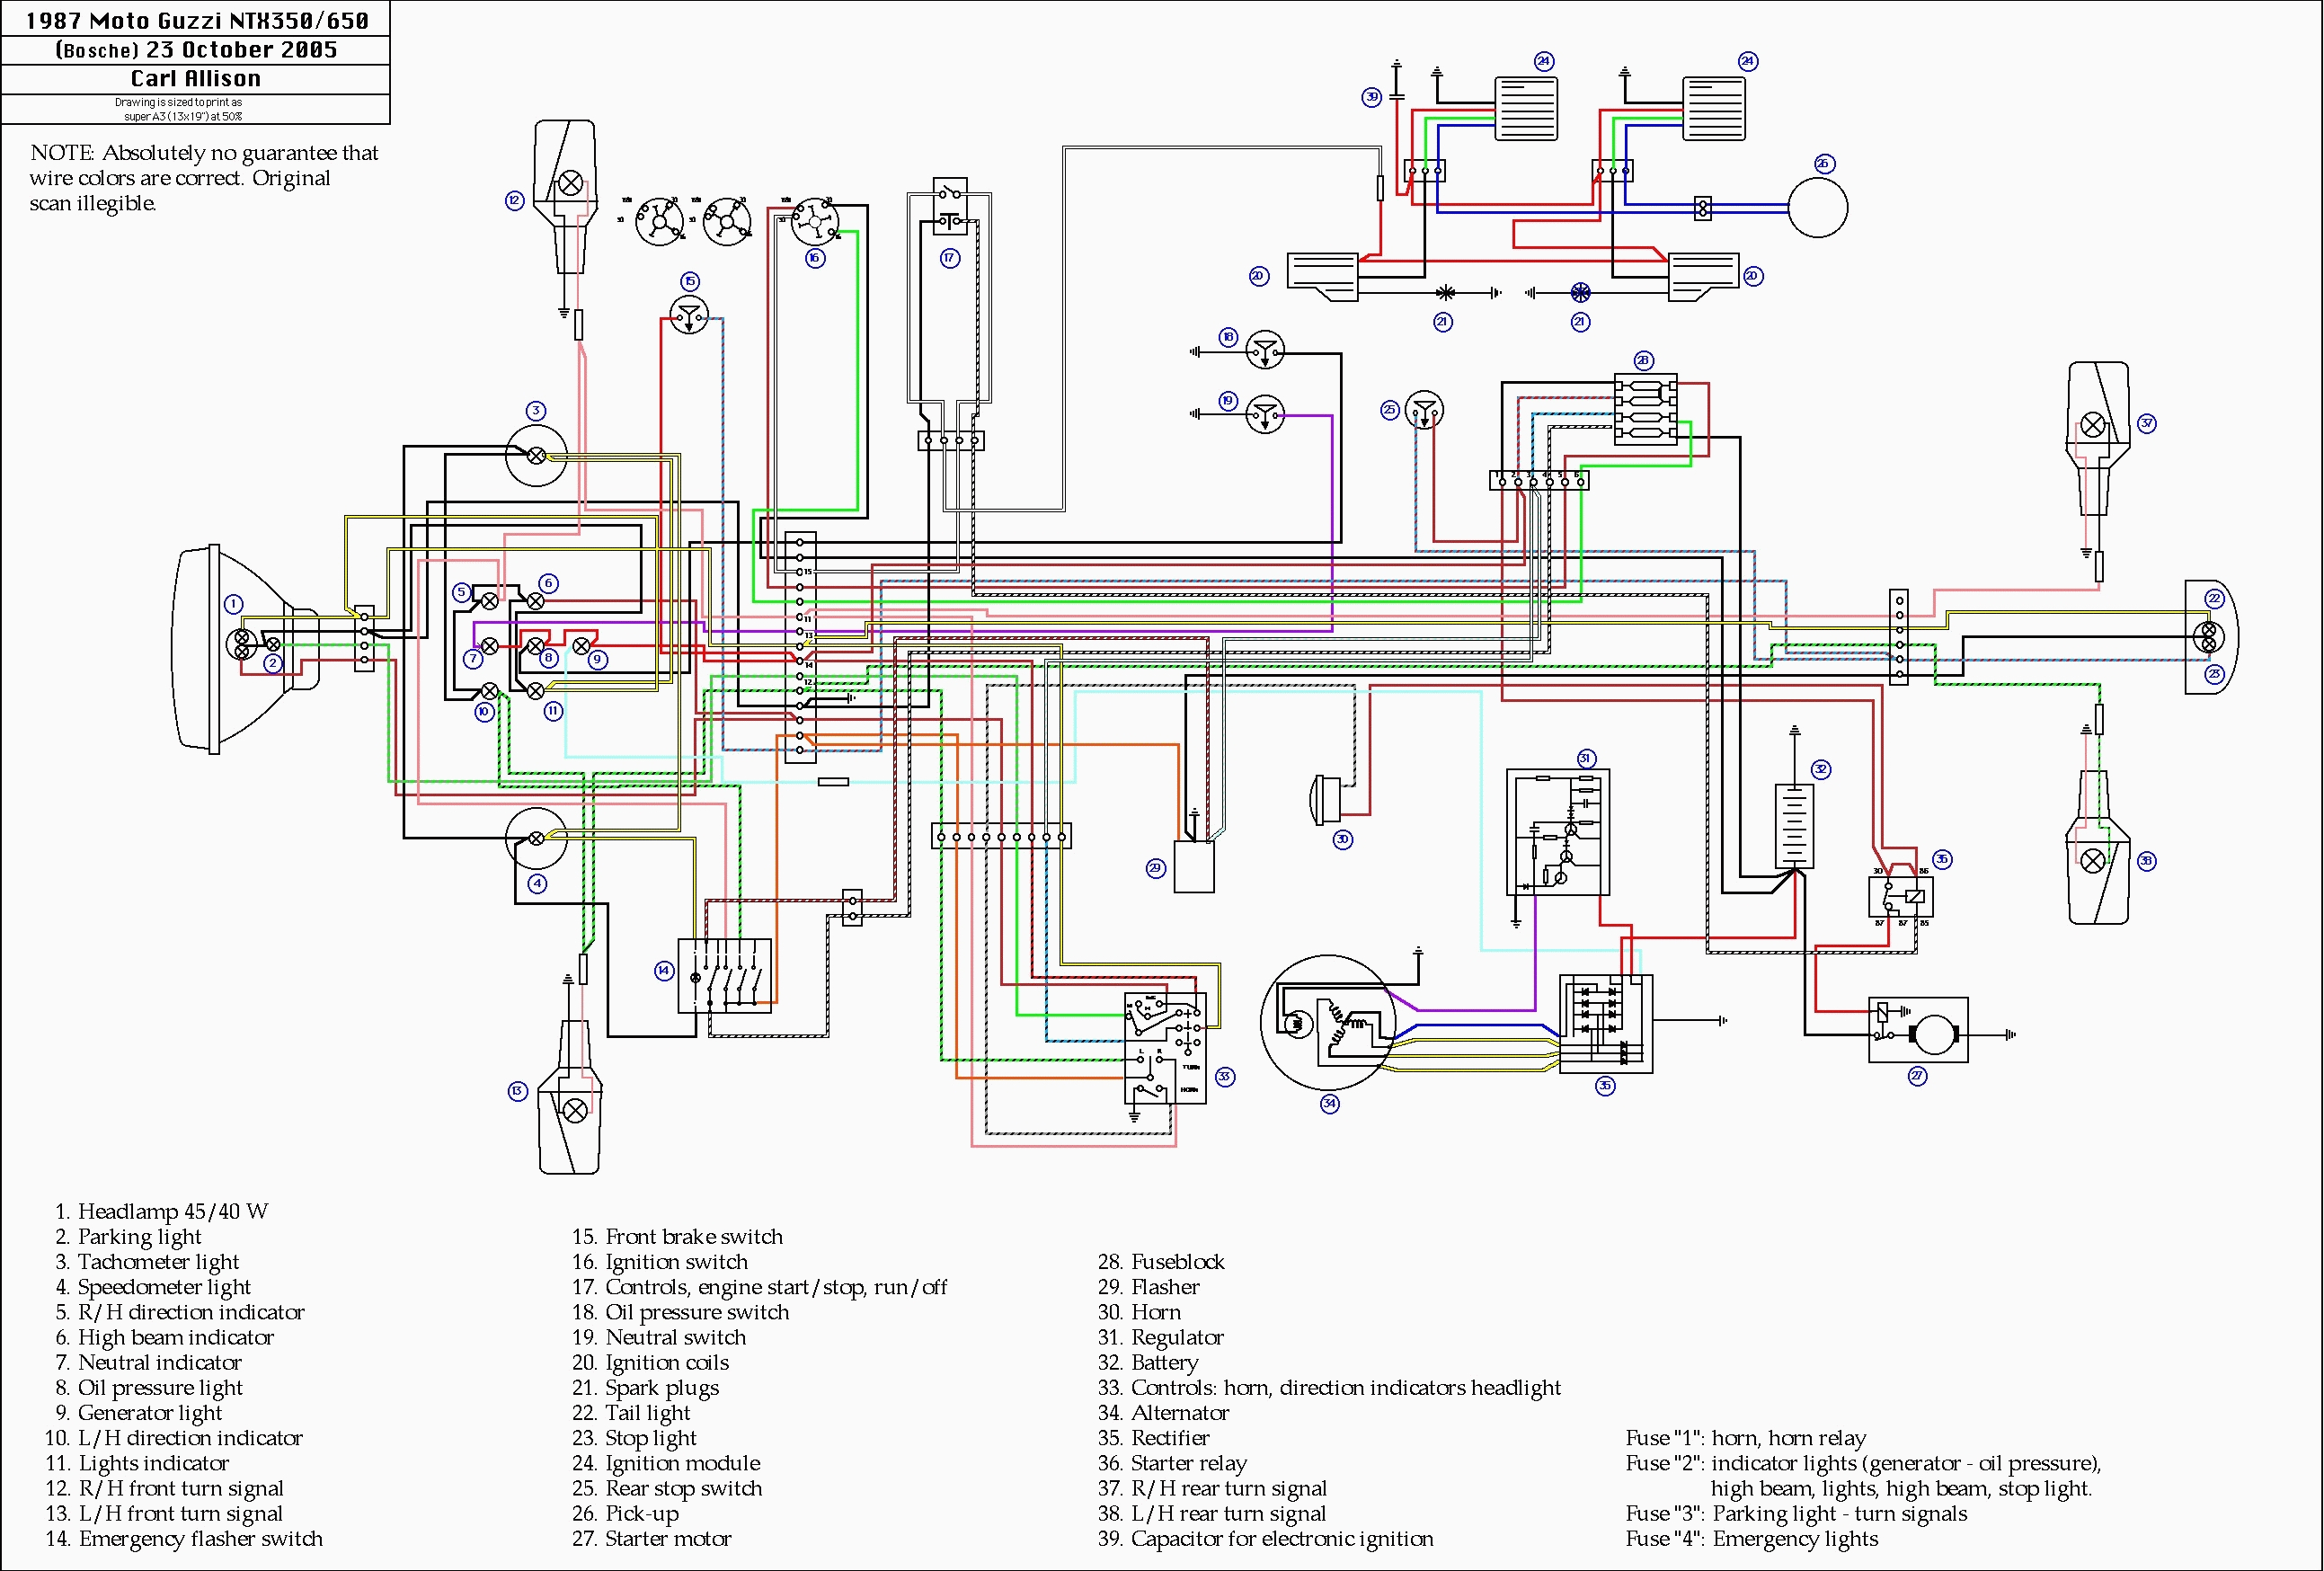 Wiring Diagram Maker Wiring Diagrams For Balers Wiring Diagram Srconds